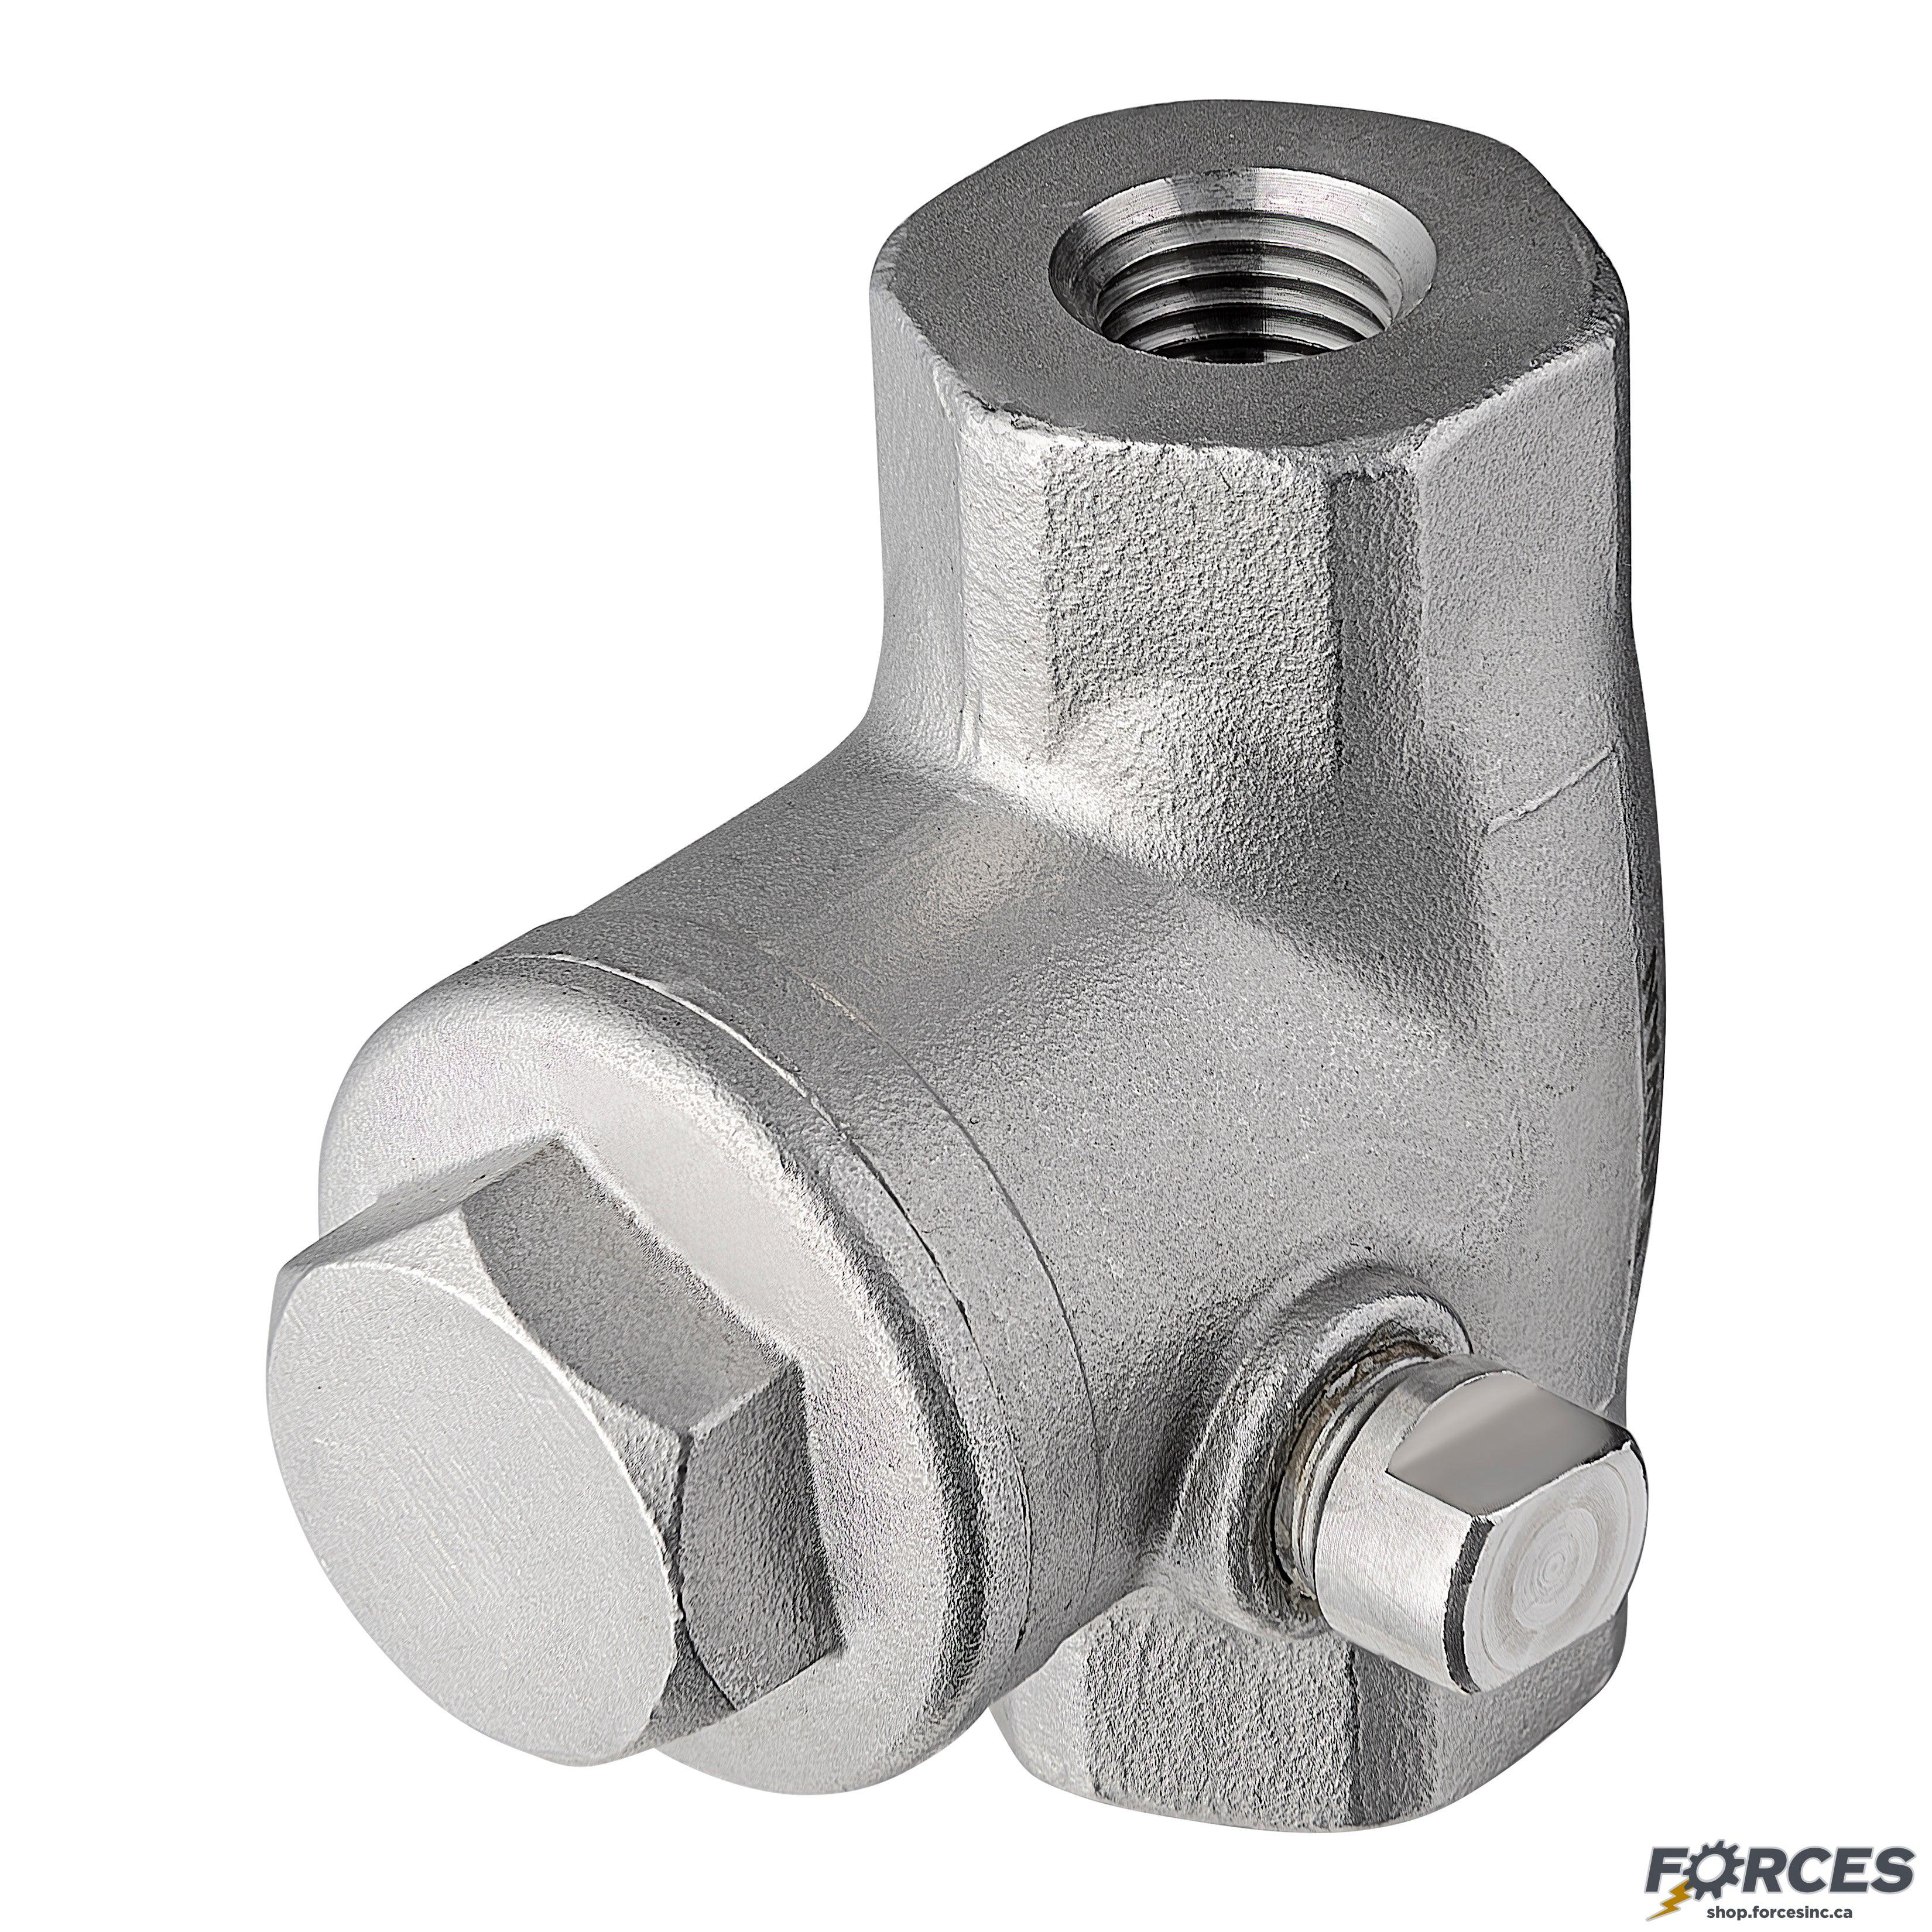 1/2" Swing Check Valve NPT #200 - Stainless Steel 316 - Forces Inc